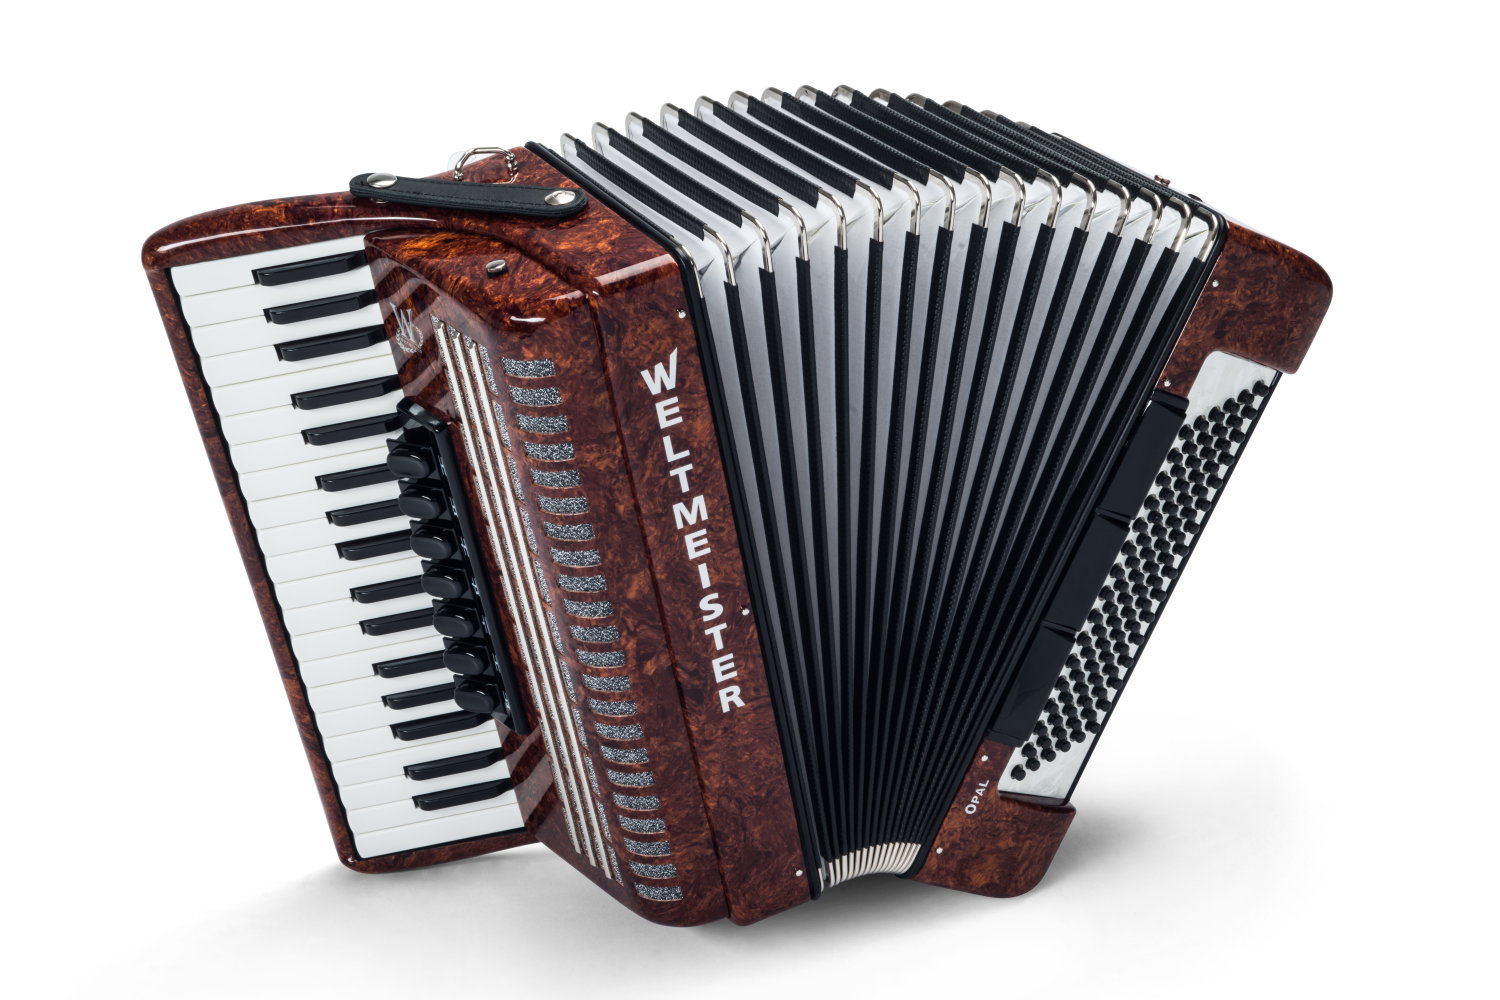 Weltmeister Opal Piano Accordion 96 Bass Brown